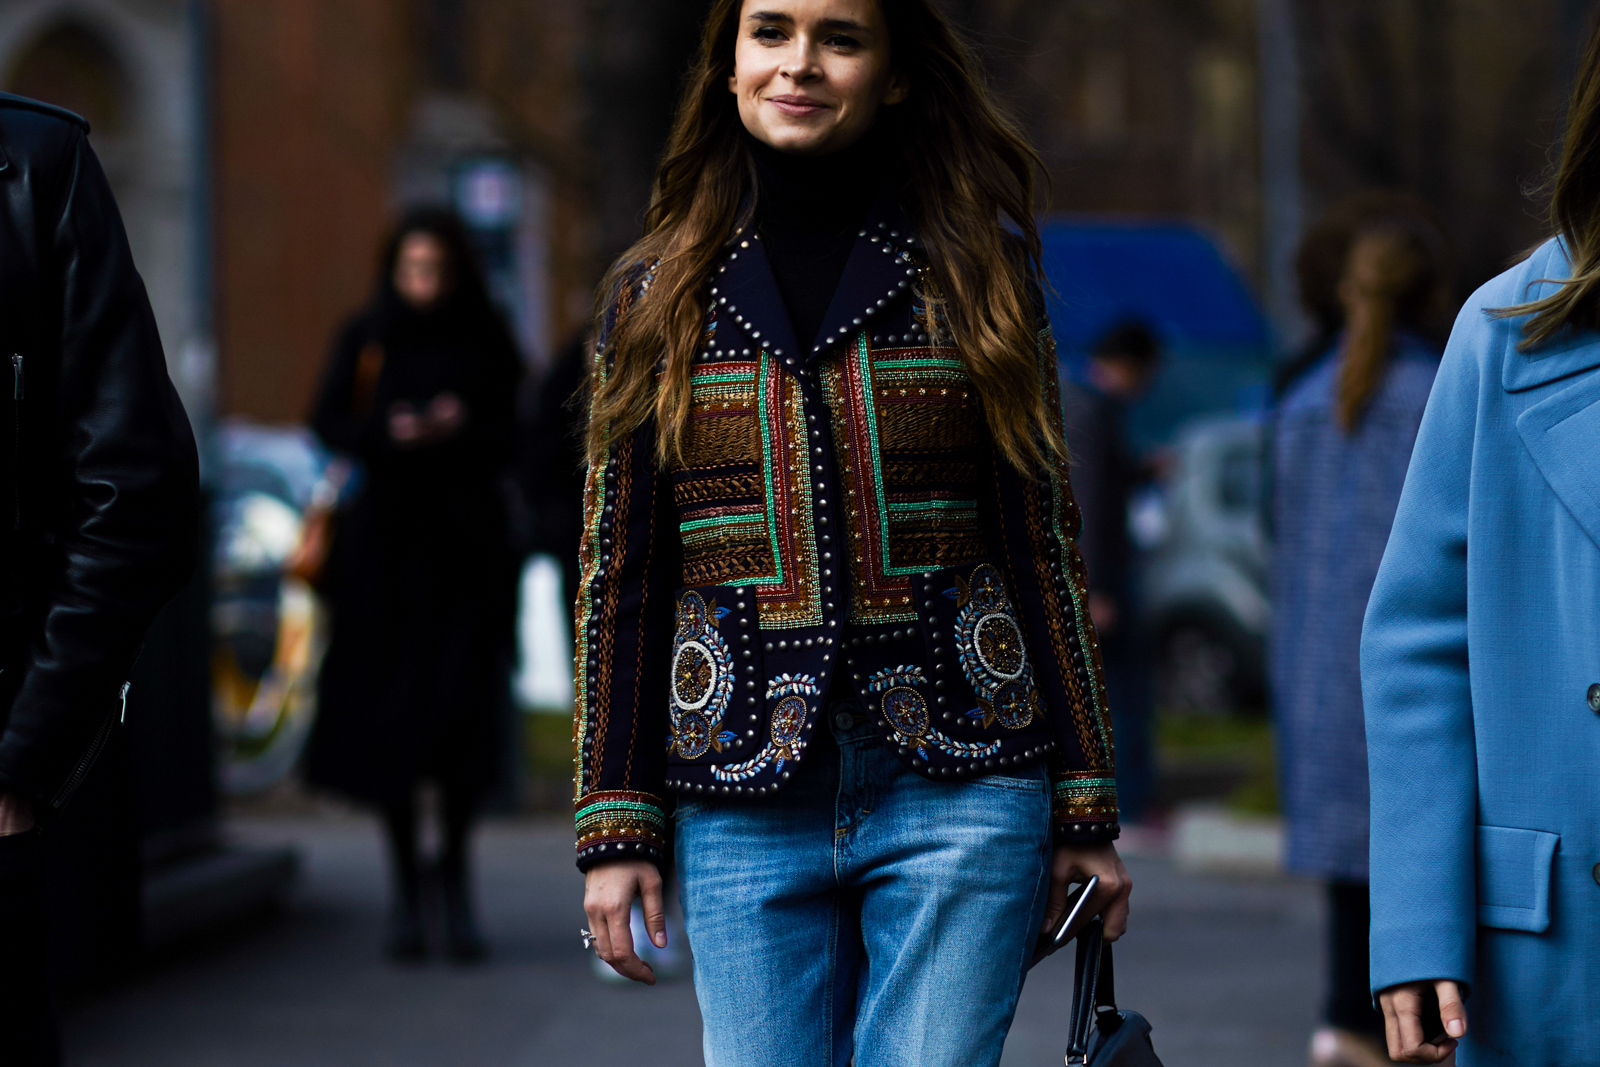 MFW Street Style: Miroslava Duma wearing a blue embroidered jacket by Valentino and jeans before a fashion show in Milan, Italy 